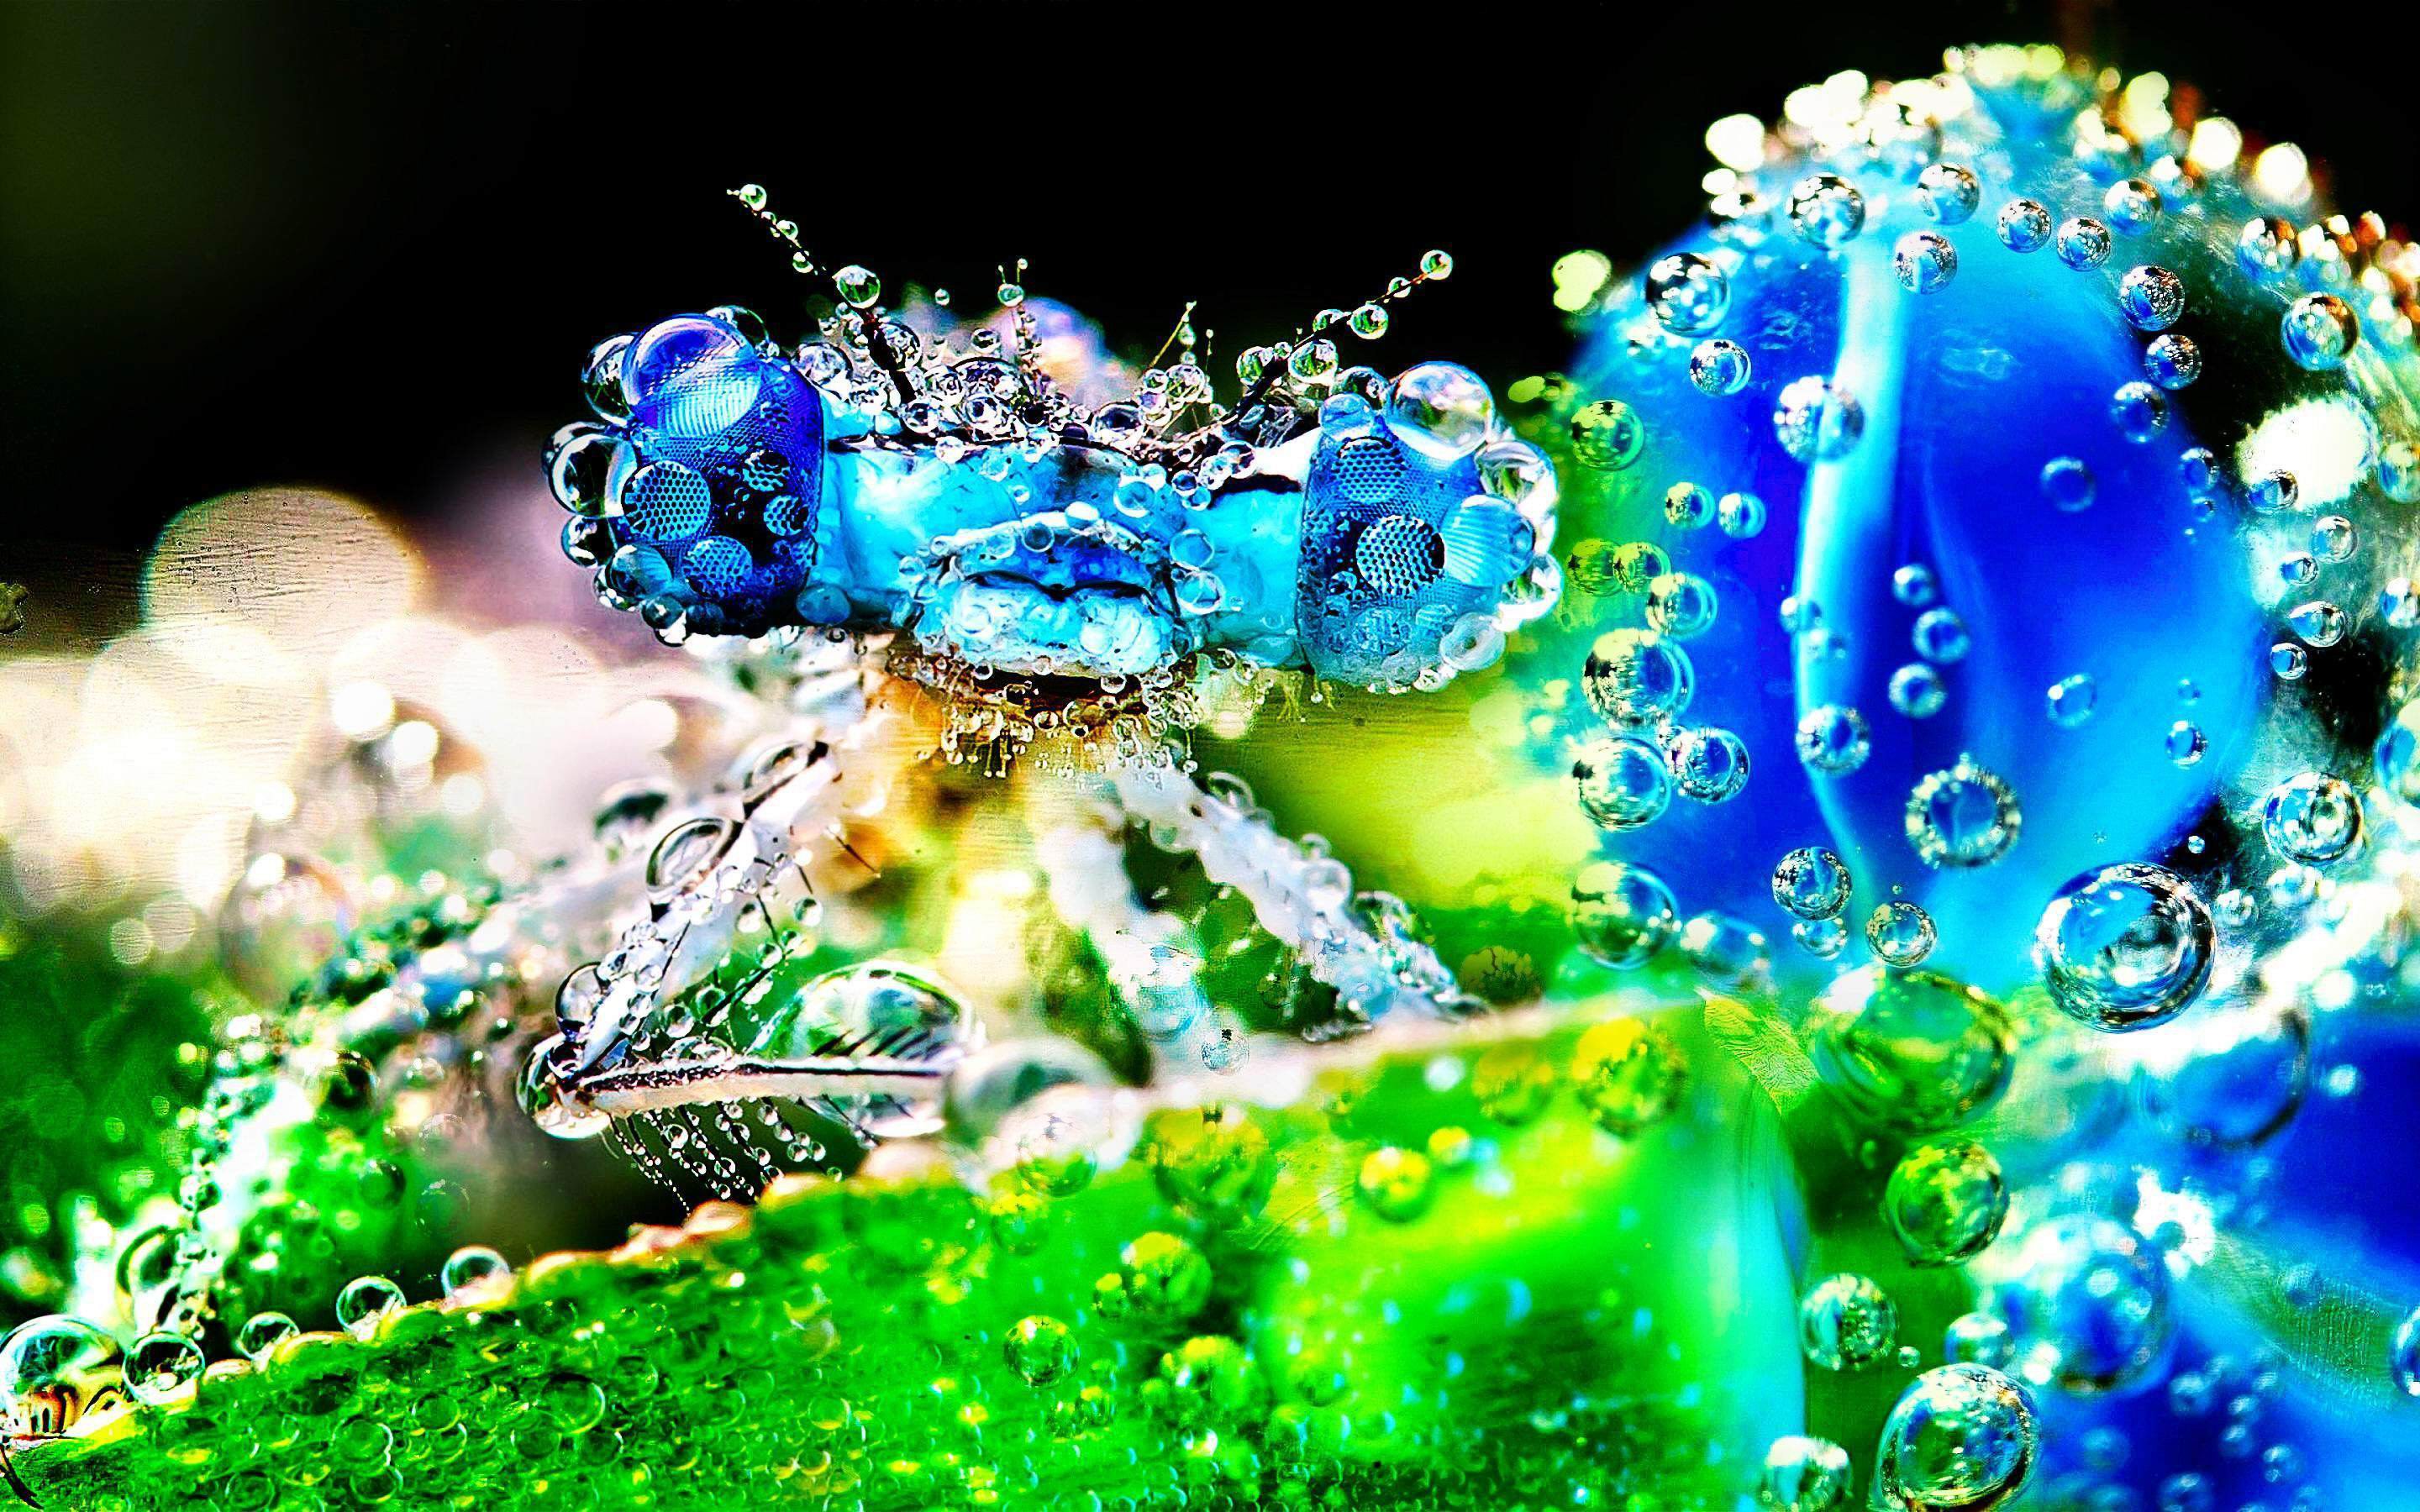 40+ Dew Drop HD Wallpapers and Backgrounds